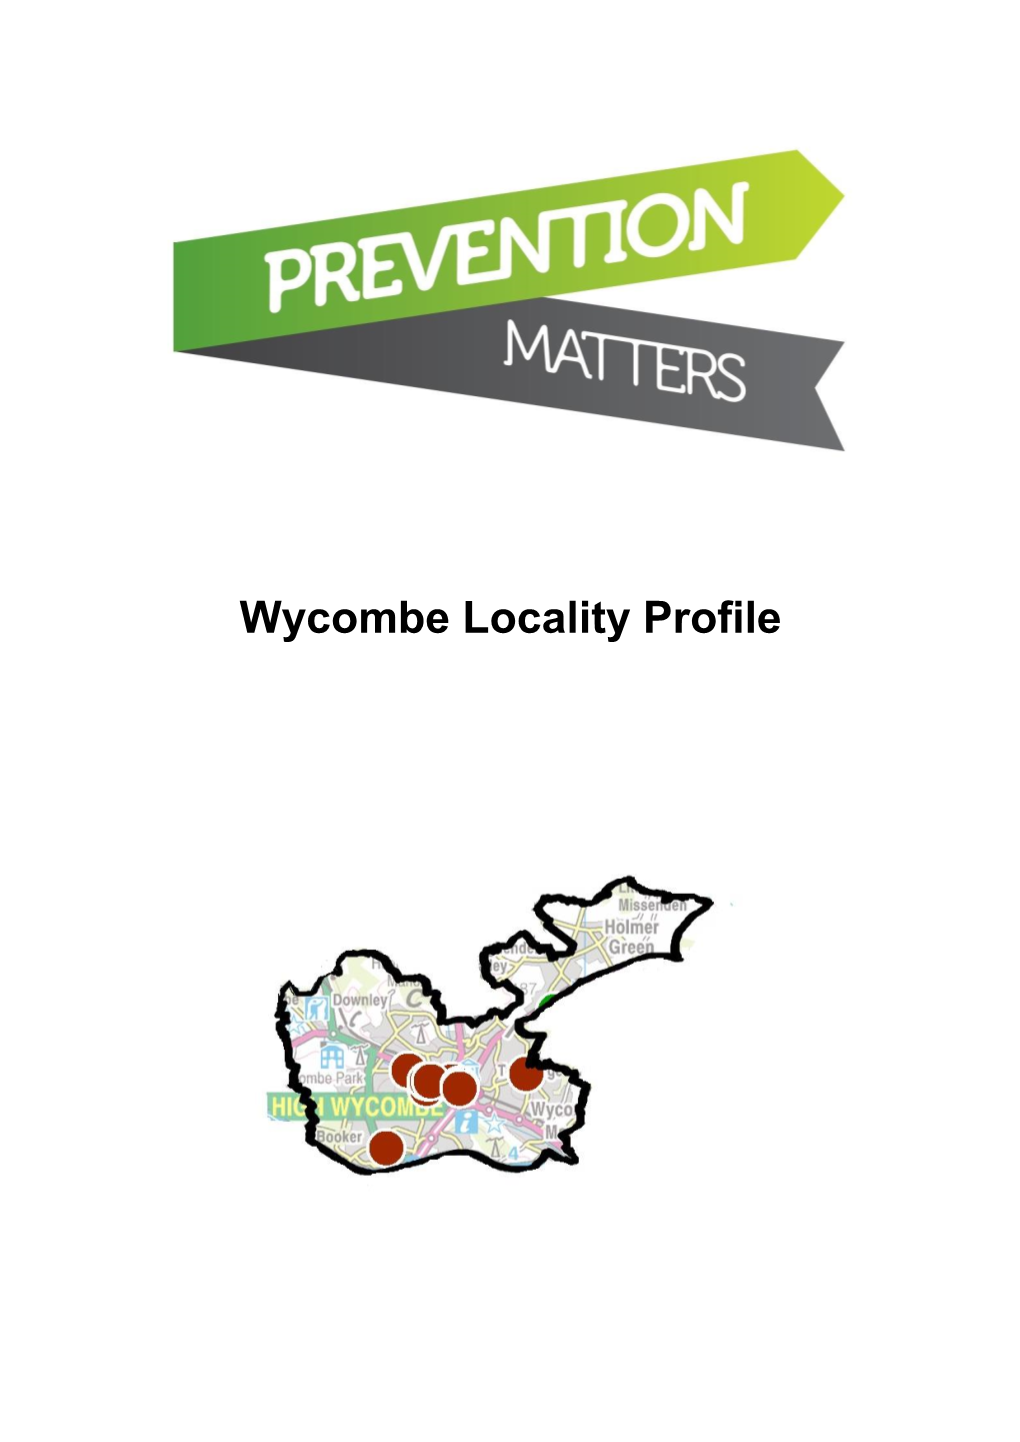 Wycombe Locality Profile